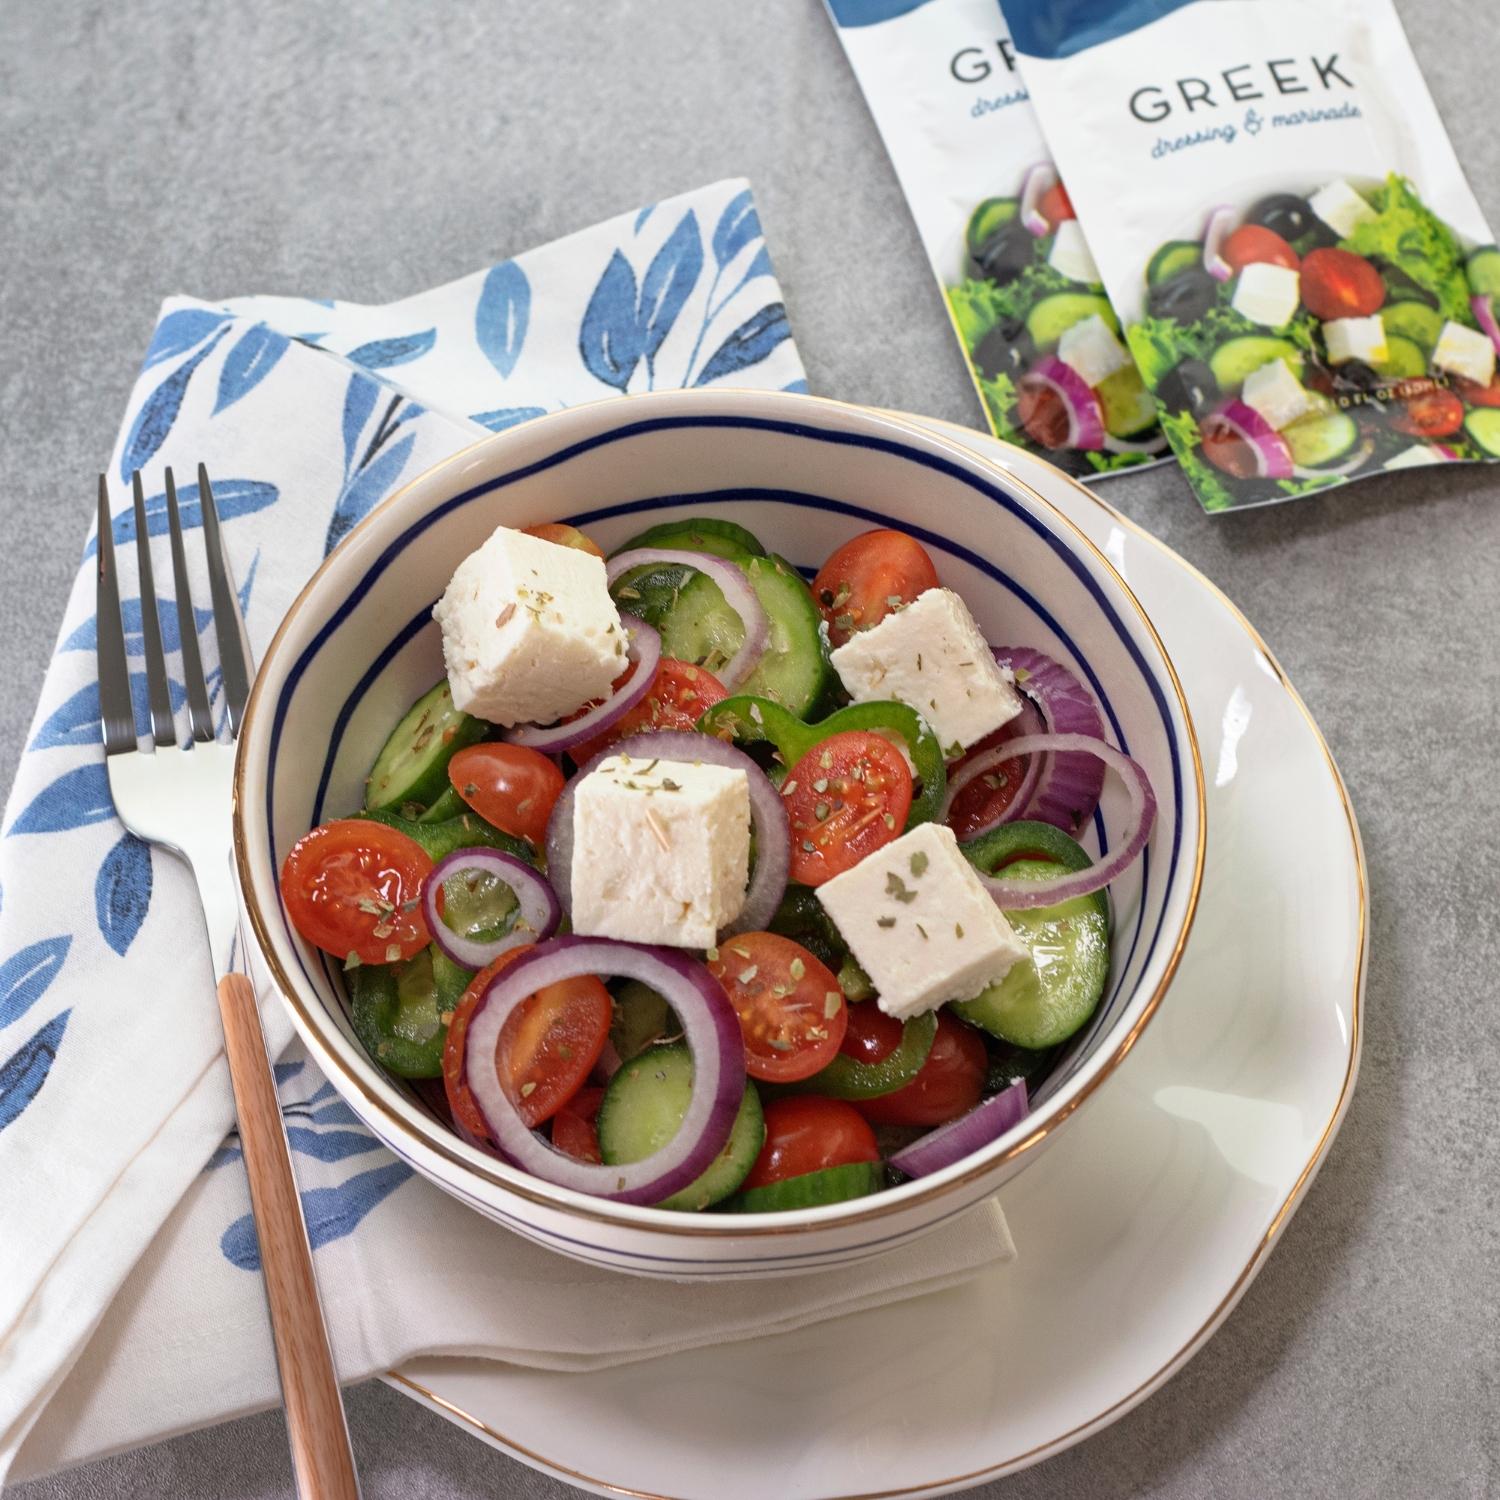 Single serve greek salad dressing packet next to greek salad bowl with feta, tomatoes, red onion, and cucumber.